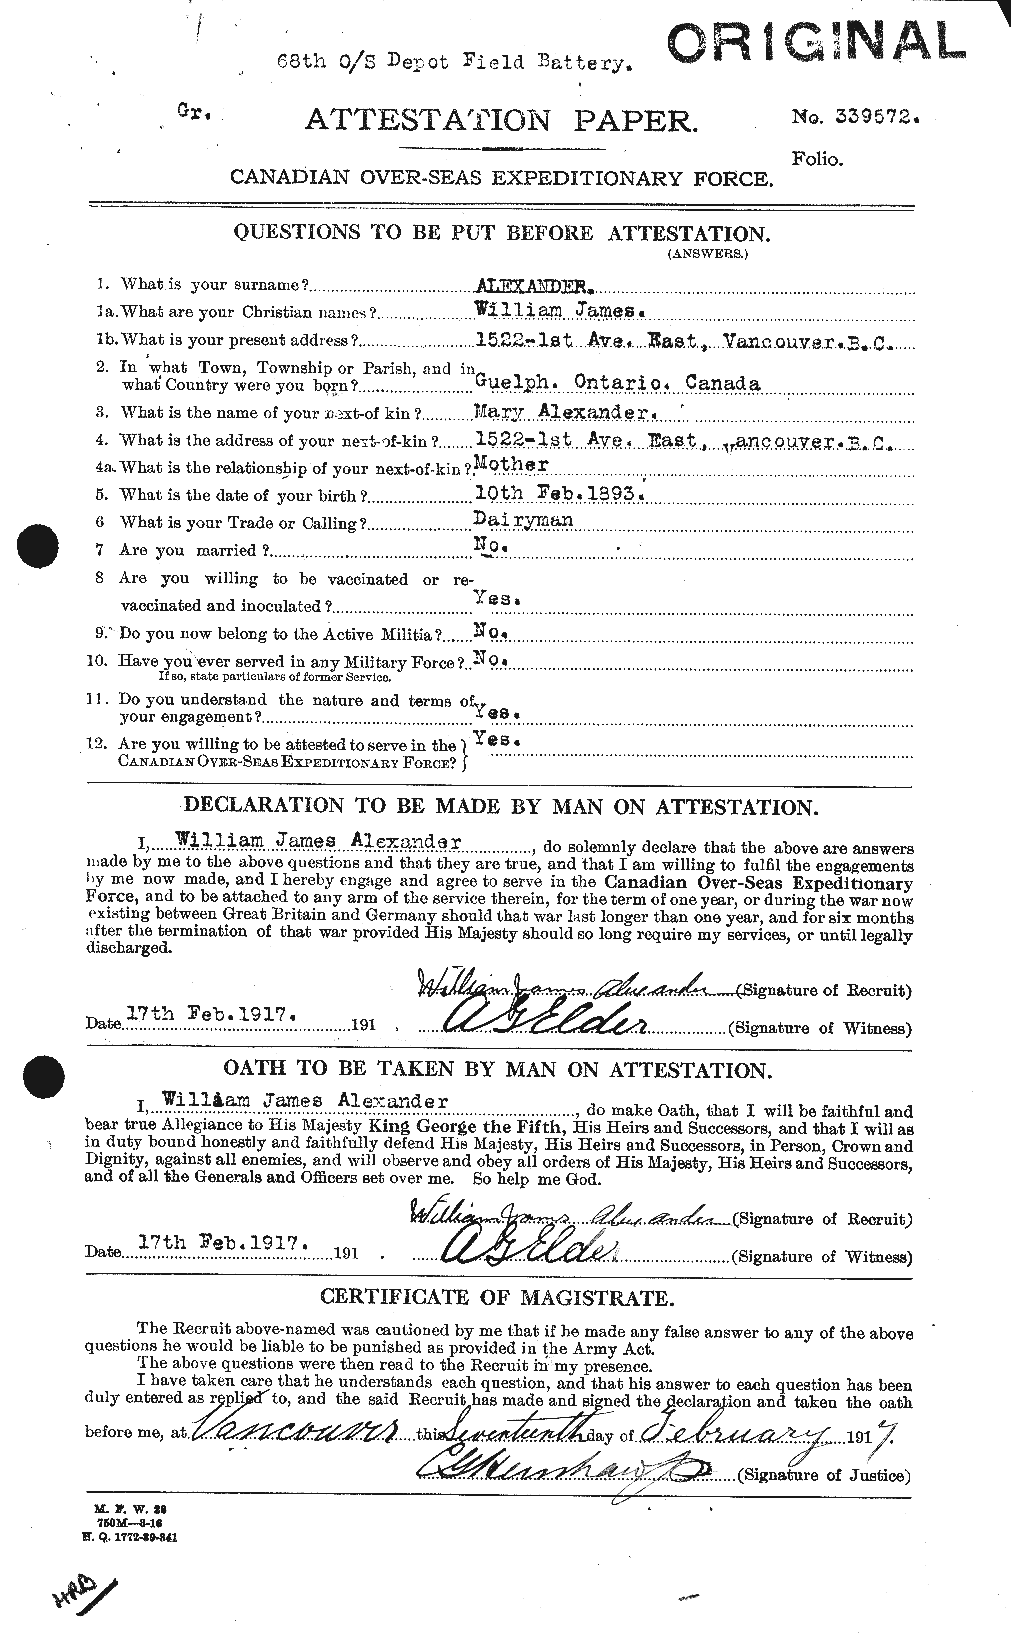 Personnel Records of the First World War - CEF 204437a